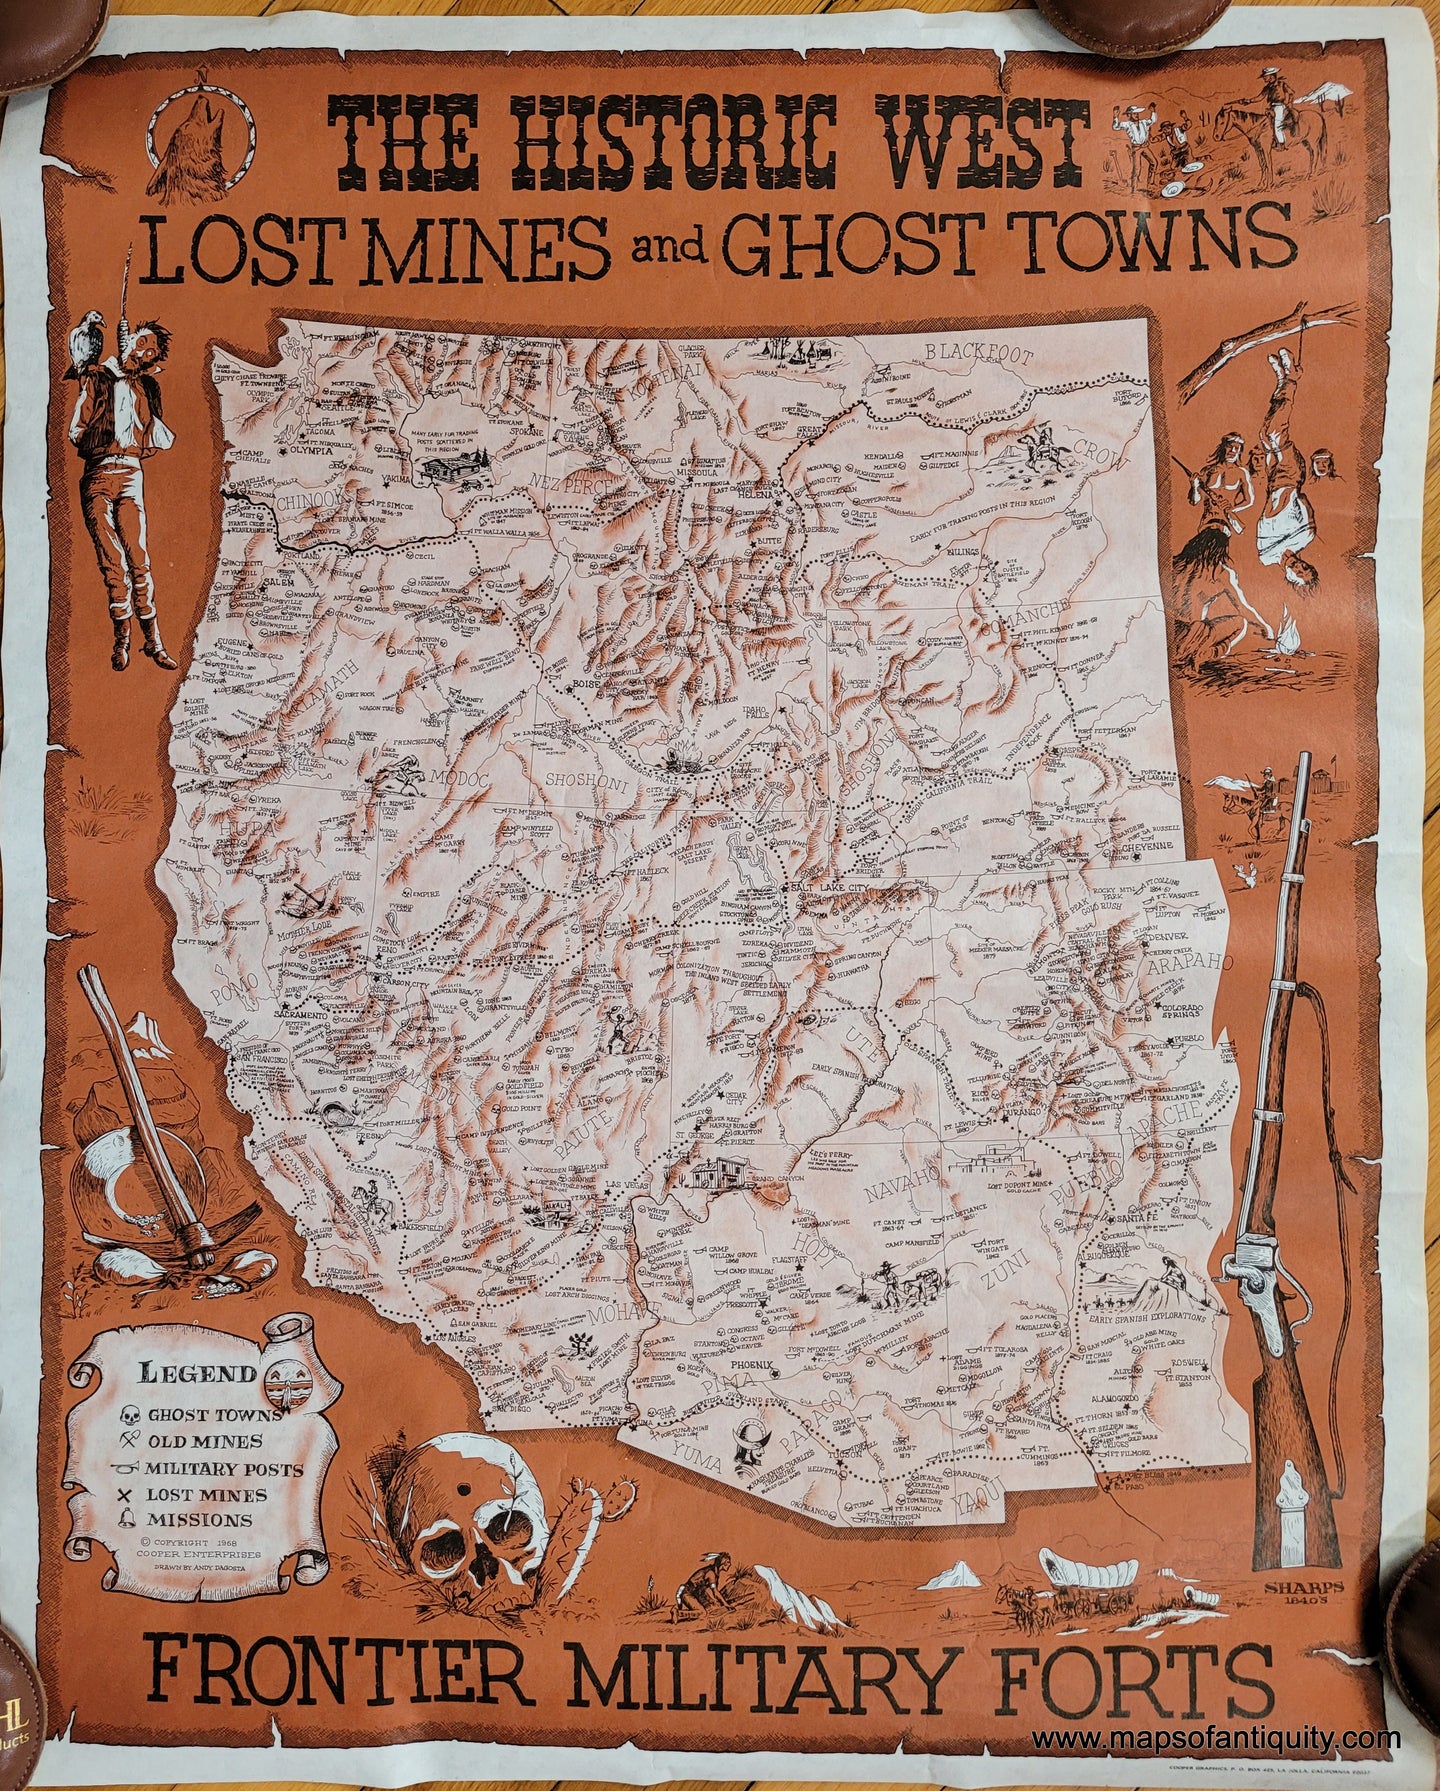 Pictorial map in the style of an old west poster bulletin. Orange-brown color along with black and white. Large map at the center shows the entire western half of the United States with lots of information and some illustrations. The Legend shows Ghost Towns, Old Mines, Military Posts, Lost Mines, and Missions. Dramatic illustrations surround the map including a rifle and a skull with a hole in the forehead. 